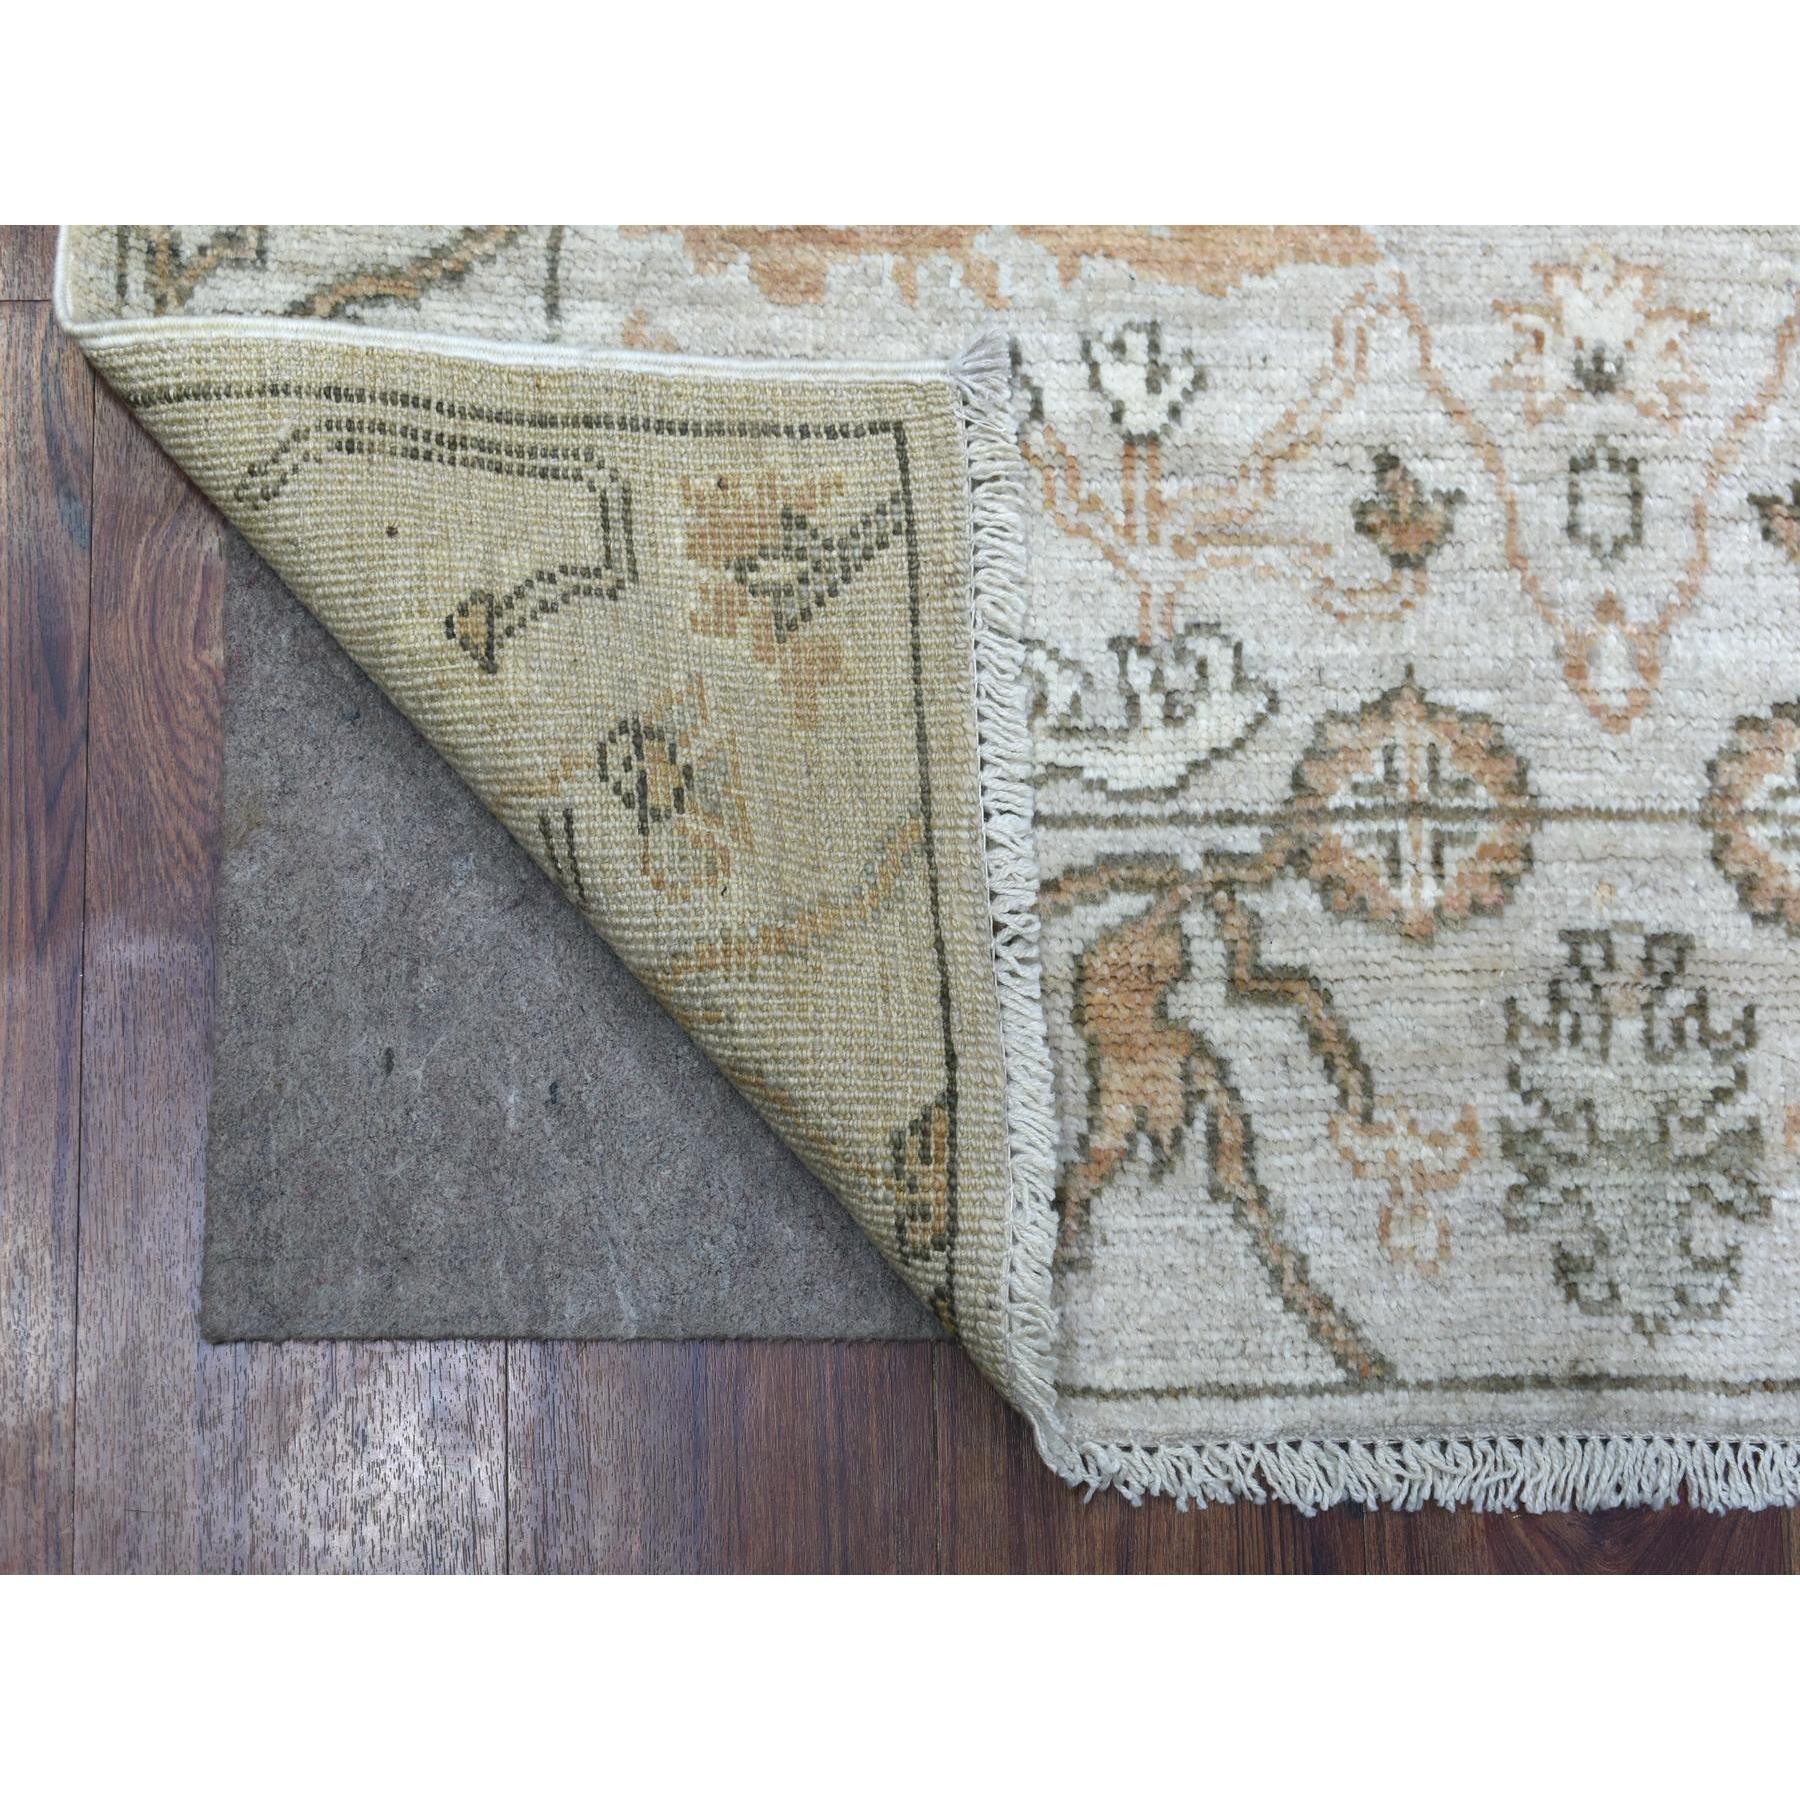 3'9"x5'7" Hand Woven Angora Oushak with Open and Flowing Design Soft Afghan Wool Oriental Rug 